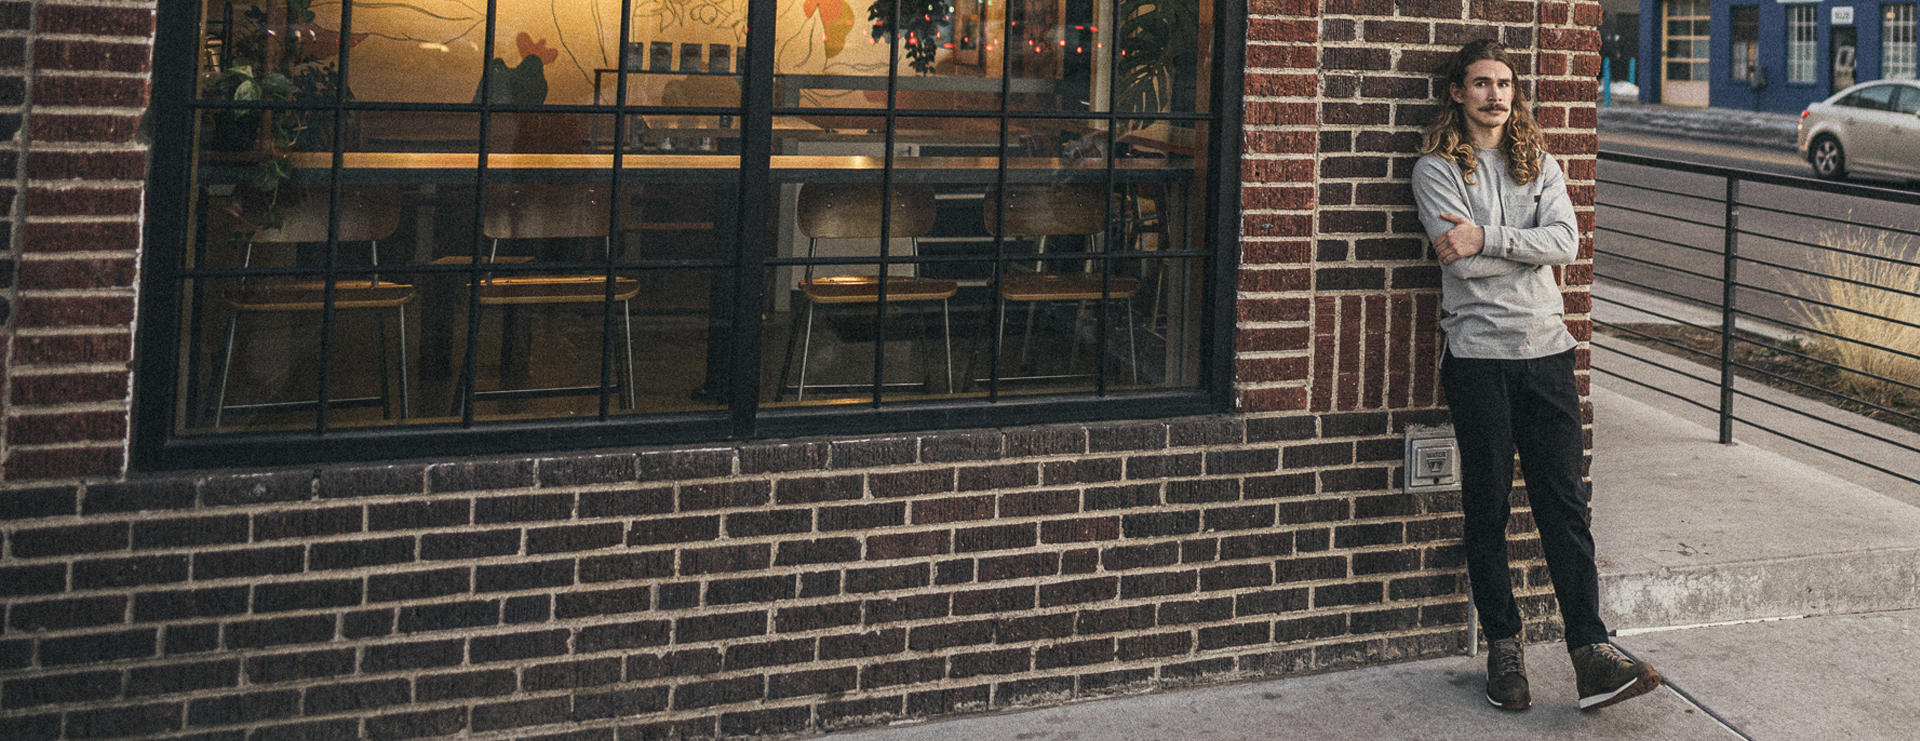 Caleb leaning against the outside brick wall of a coffee shop.